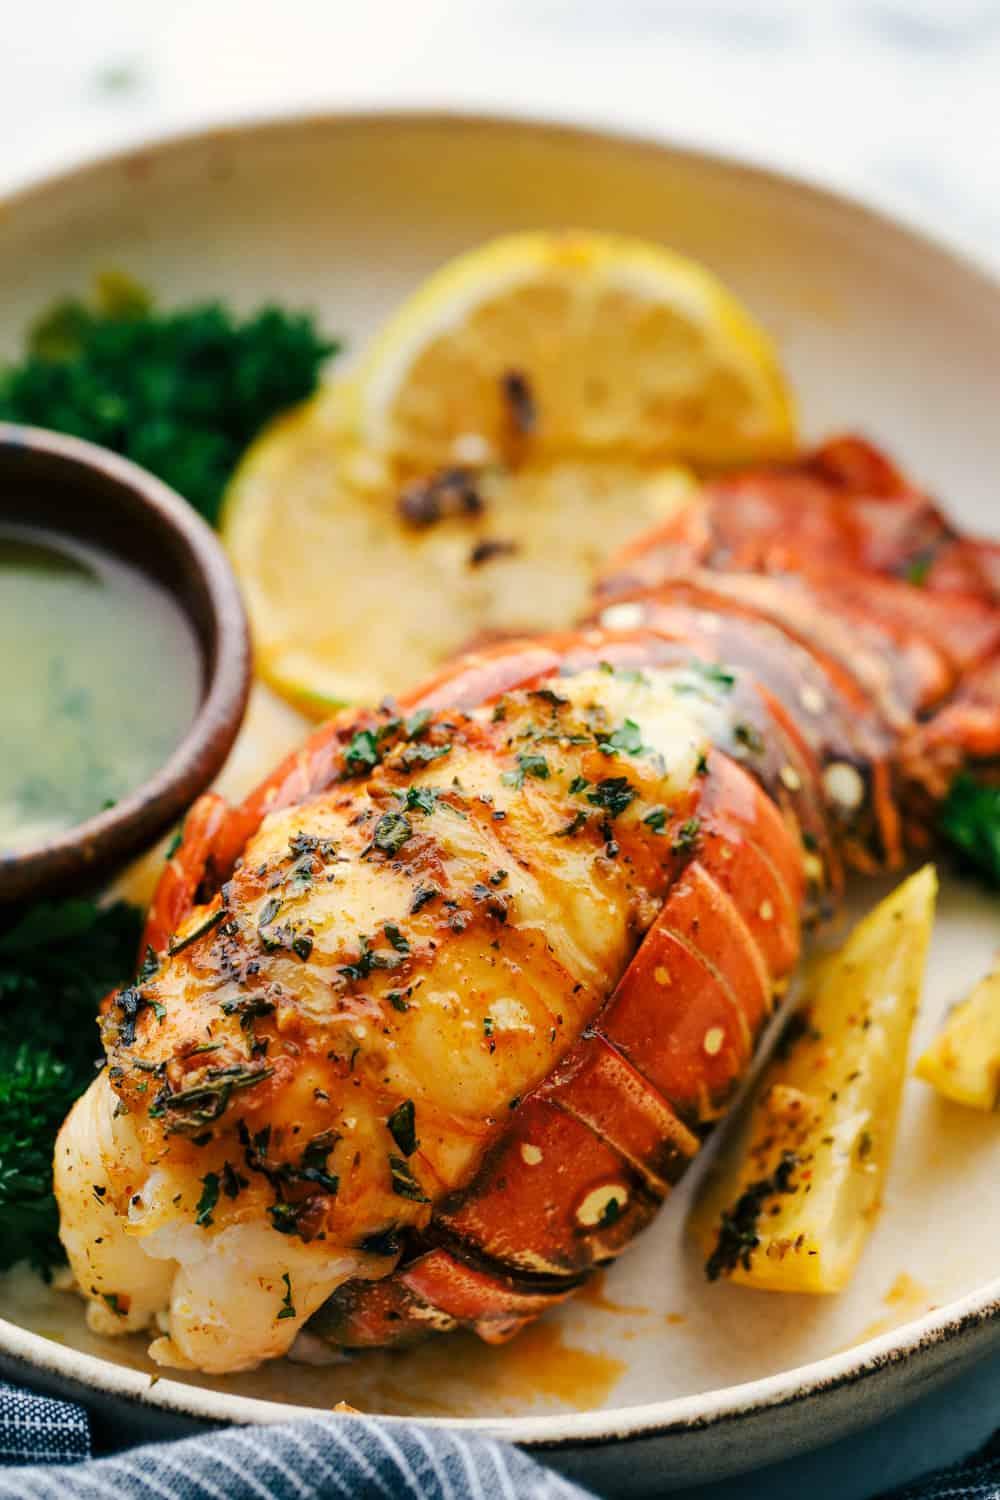 A lobster tail butterflied and served on a plate with a buttery garlic herb sauce with lemon slices.